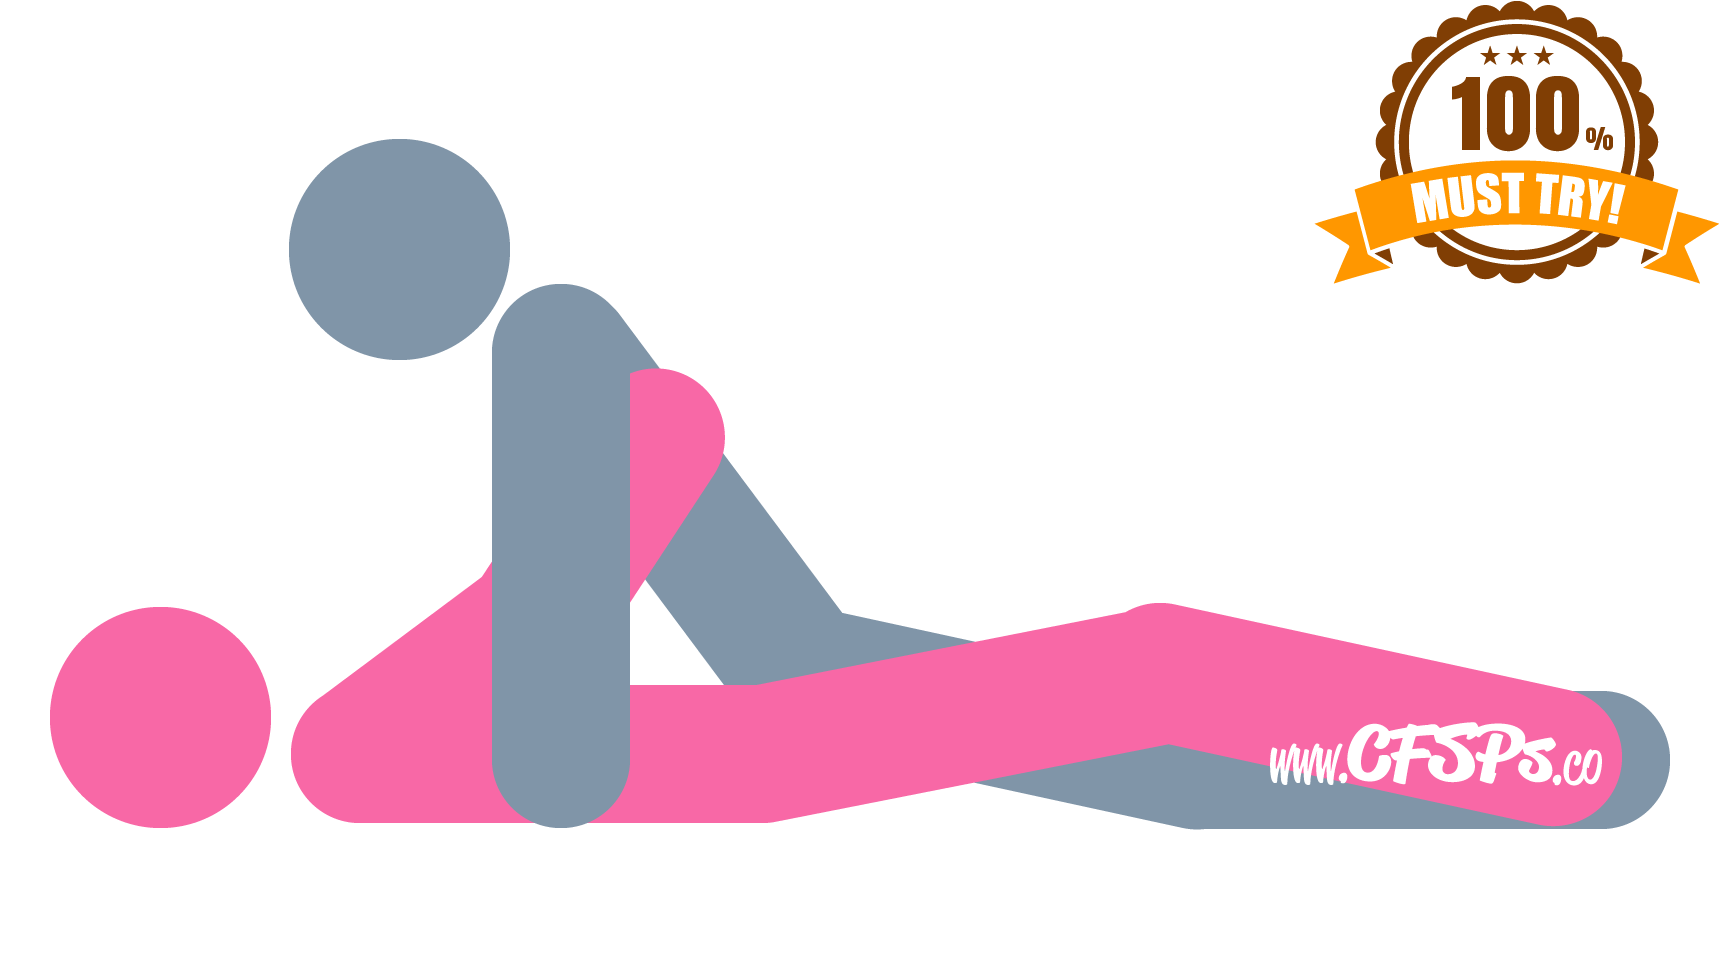 This stick figure image depicts a man and woman having sex in the Super 8 sex position. The woman is lying on her back in bed with her legs open. The man is lying between her legs and supporting his upper body with his hands on the bed beside her shoulders.